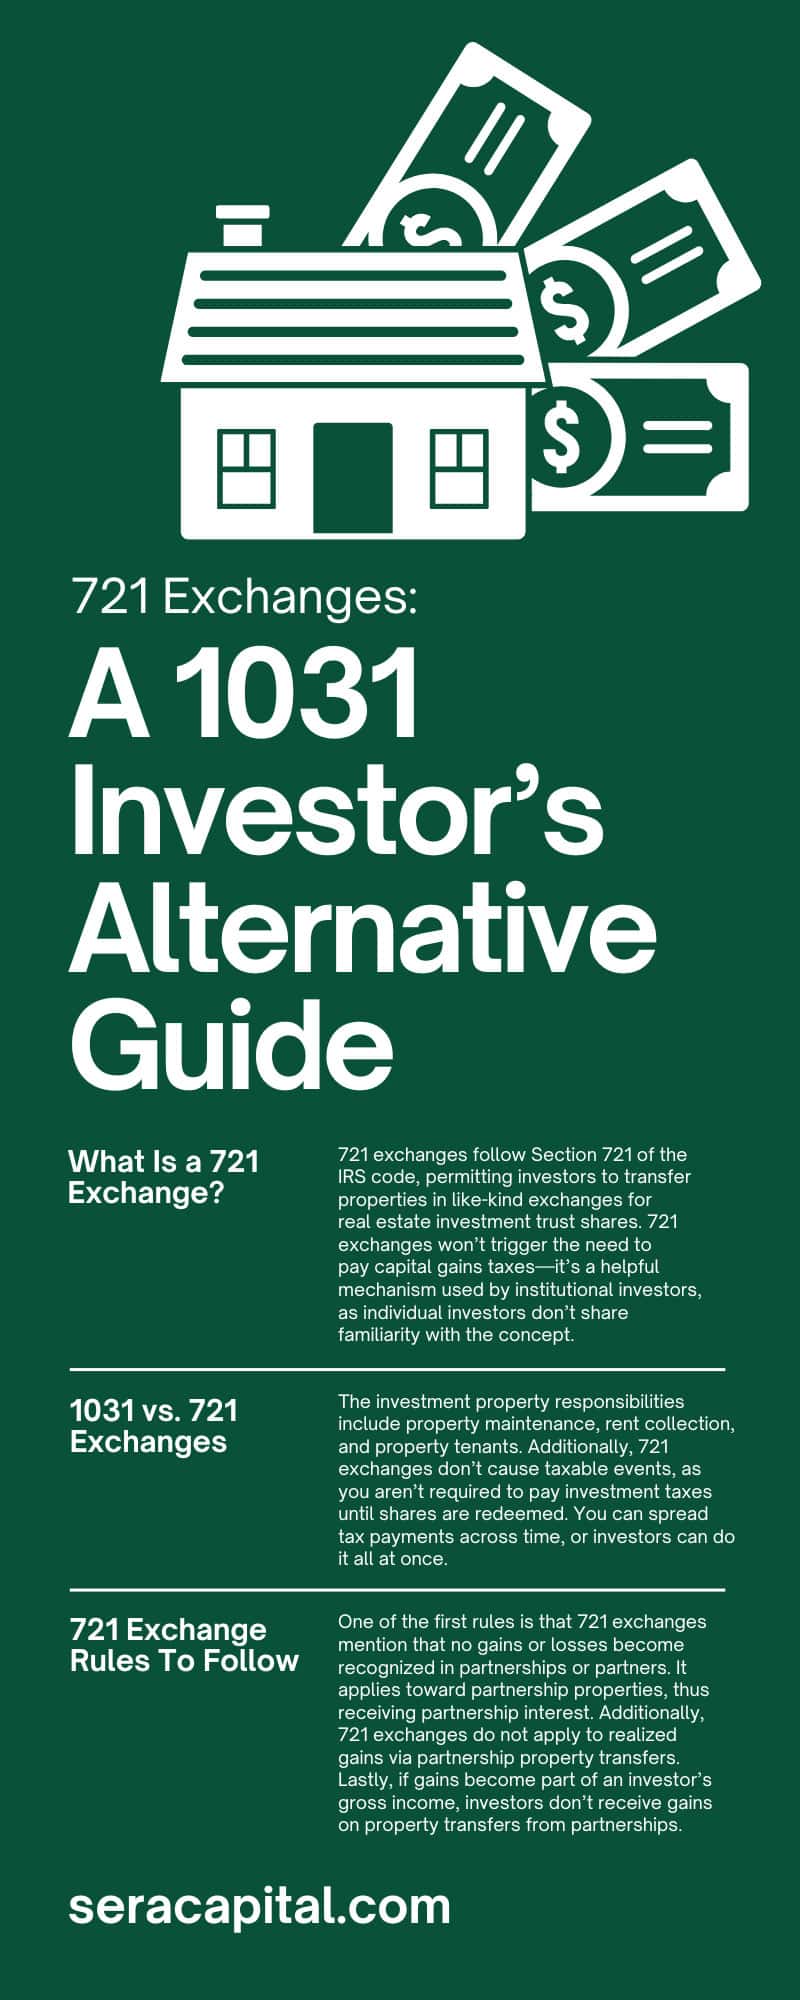 721 Exchanges: A 1031 Investor’s Alternative Guide